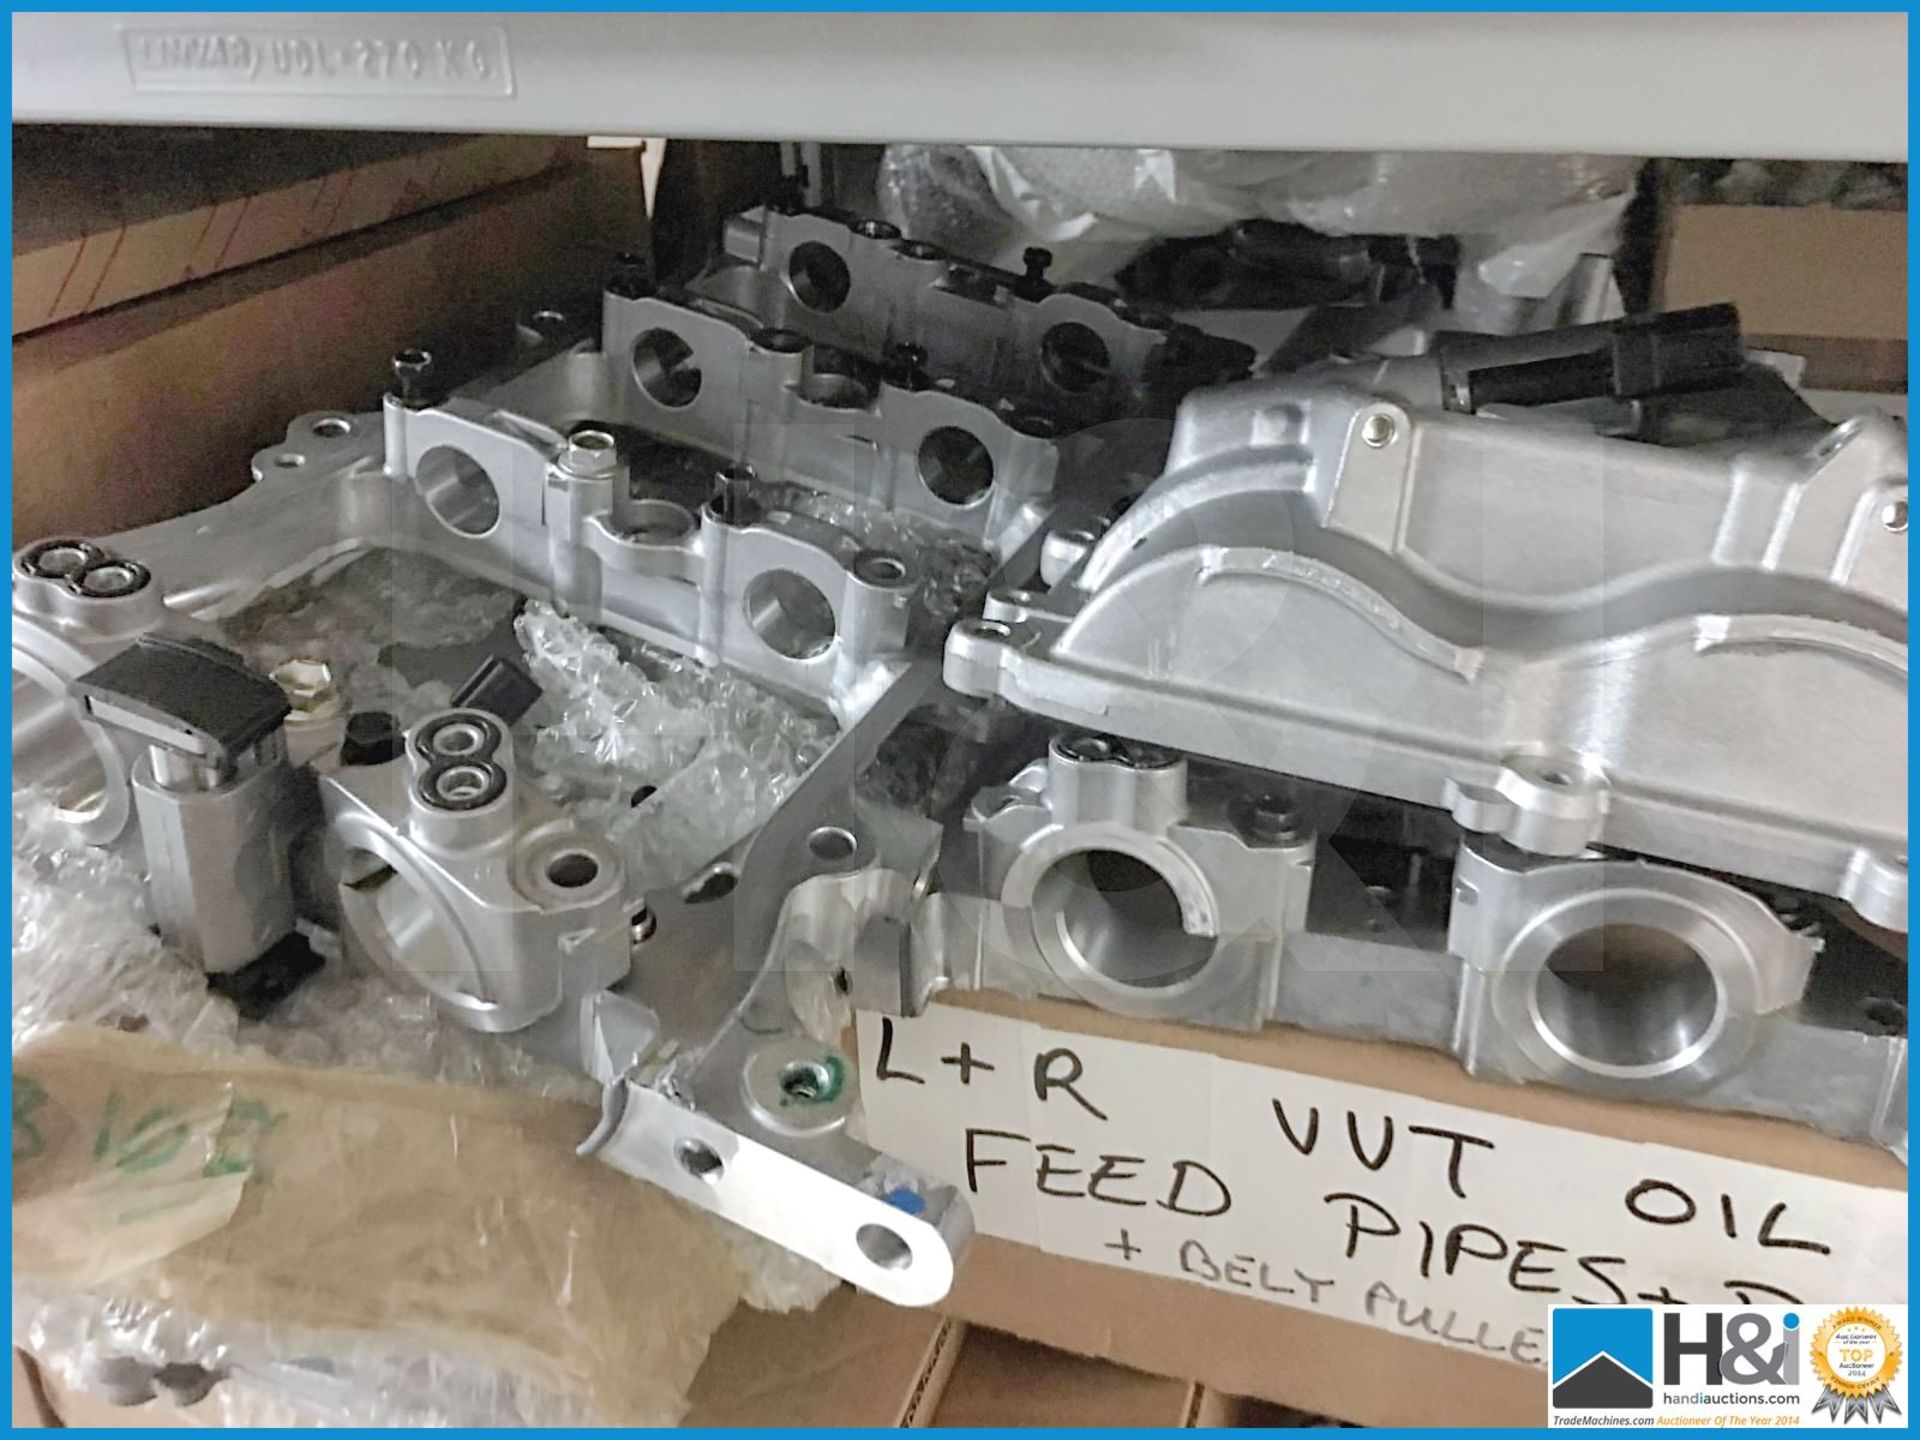 Huge qty of last remaining entire 2nd hand engine spares stock for Lotus Evora GL A, GL B and GL C. - Image 8 of 23